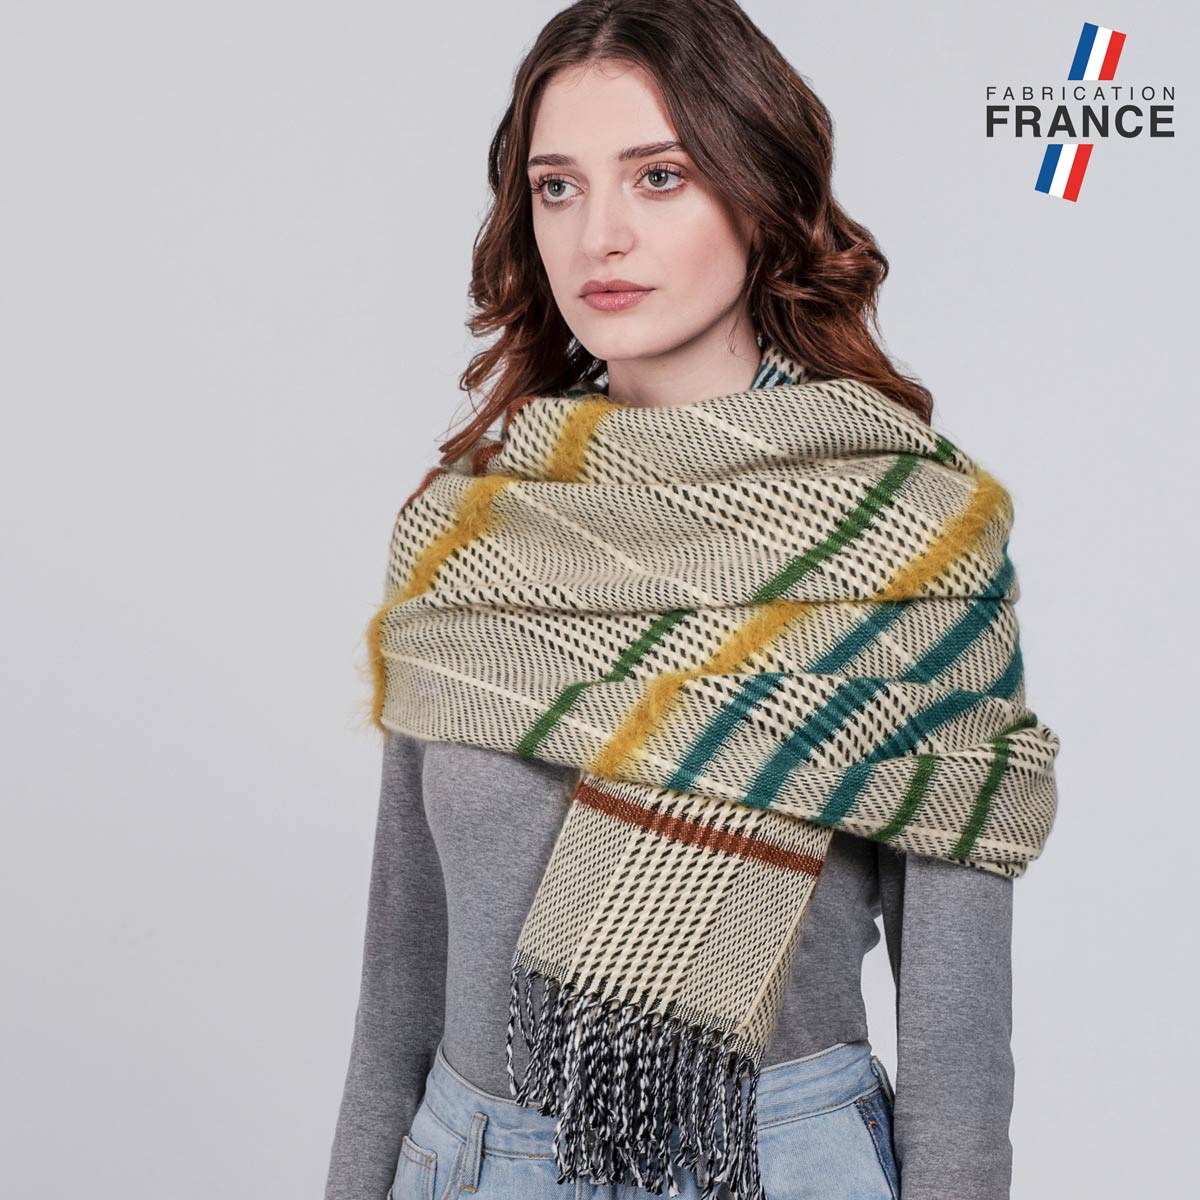 Chale-femme-motif-rayures-jaune-fabrication-francaise--AT-06753_W12-1FR